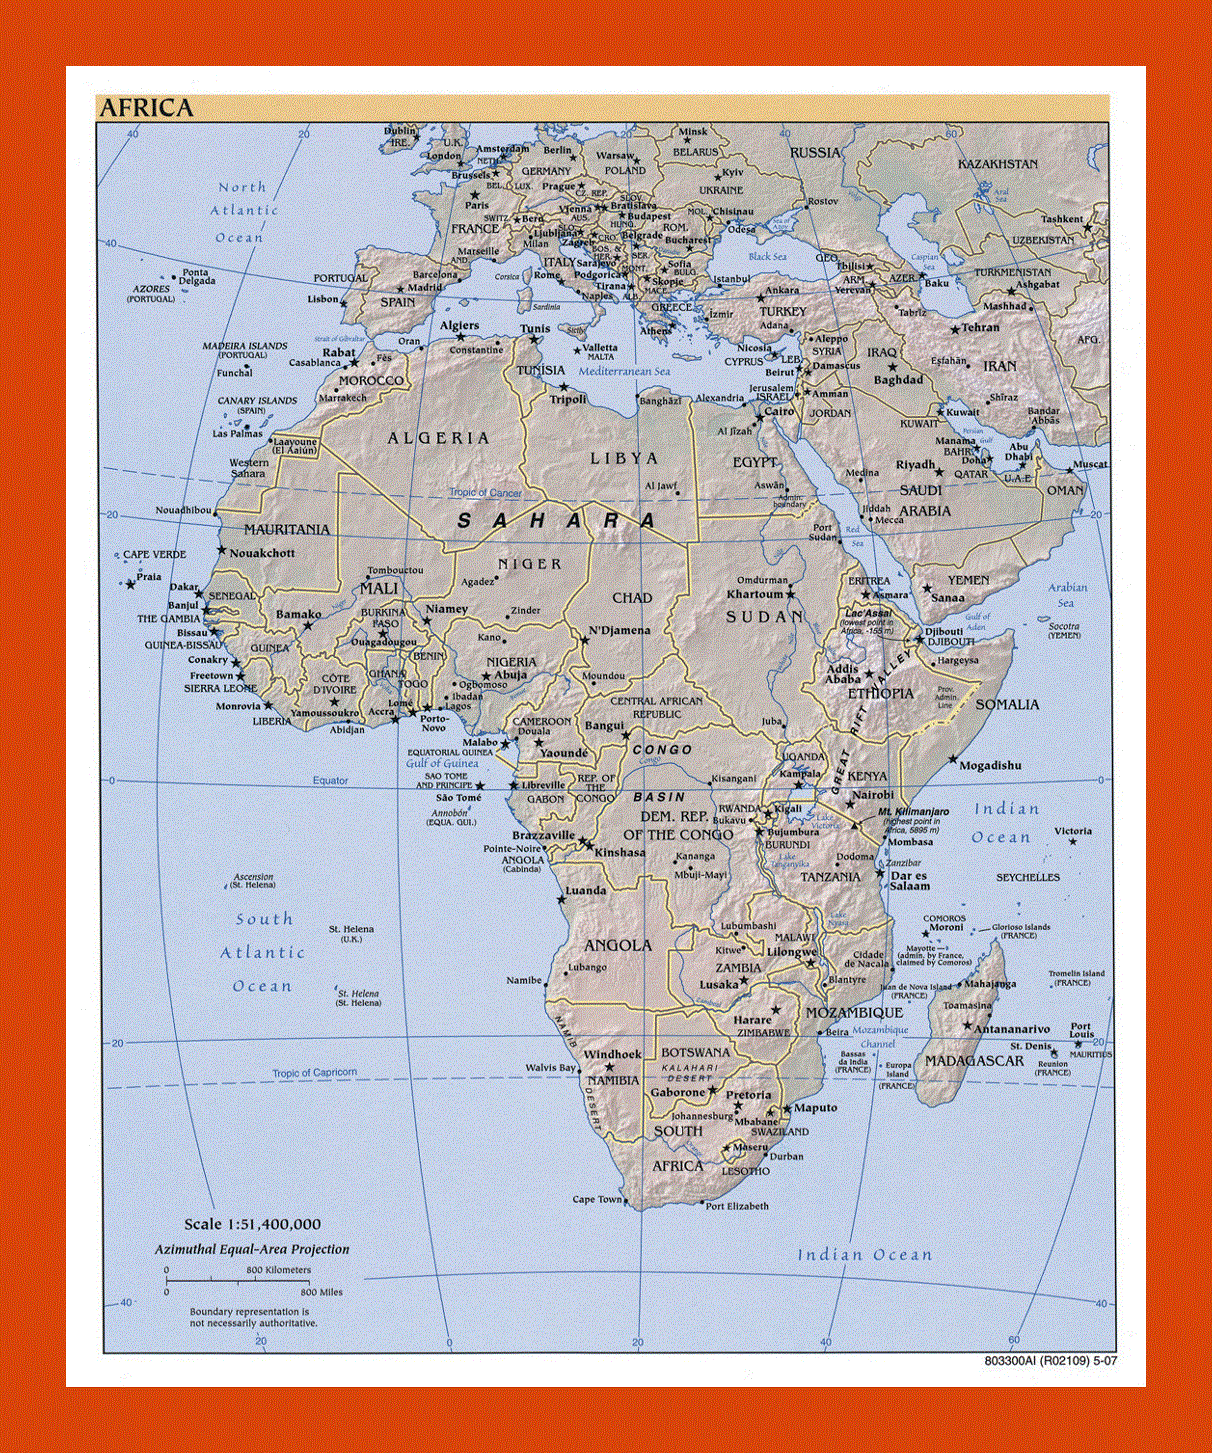 Political map of Africa - 2007